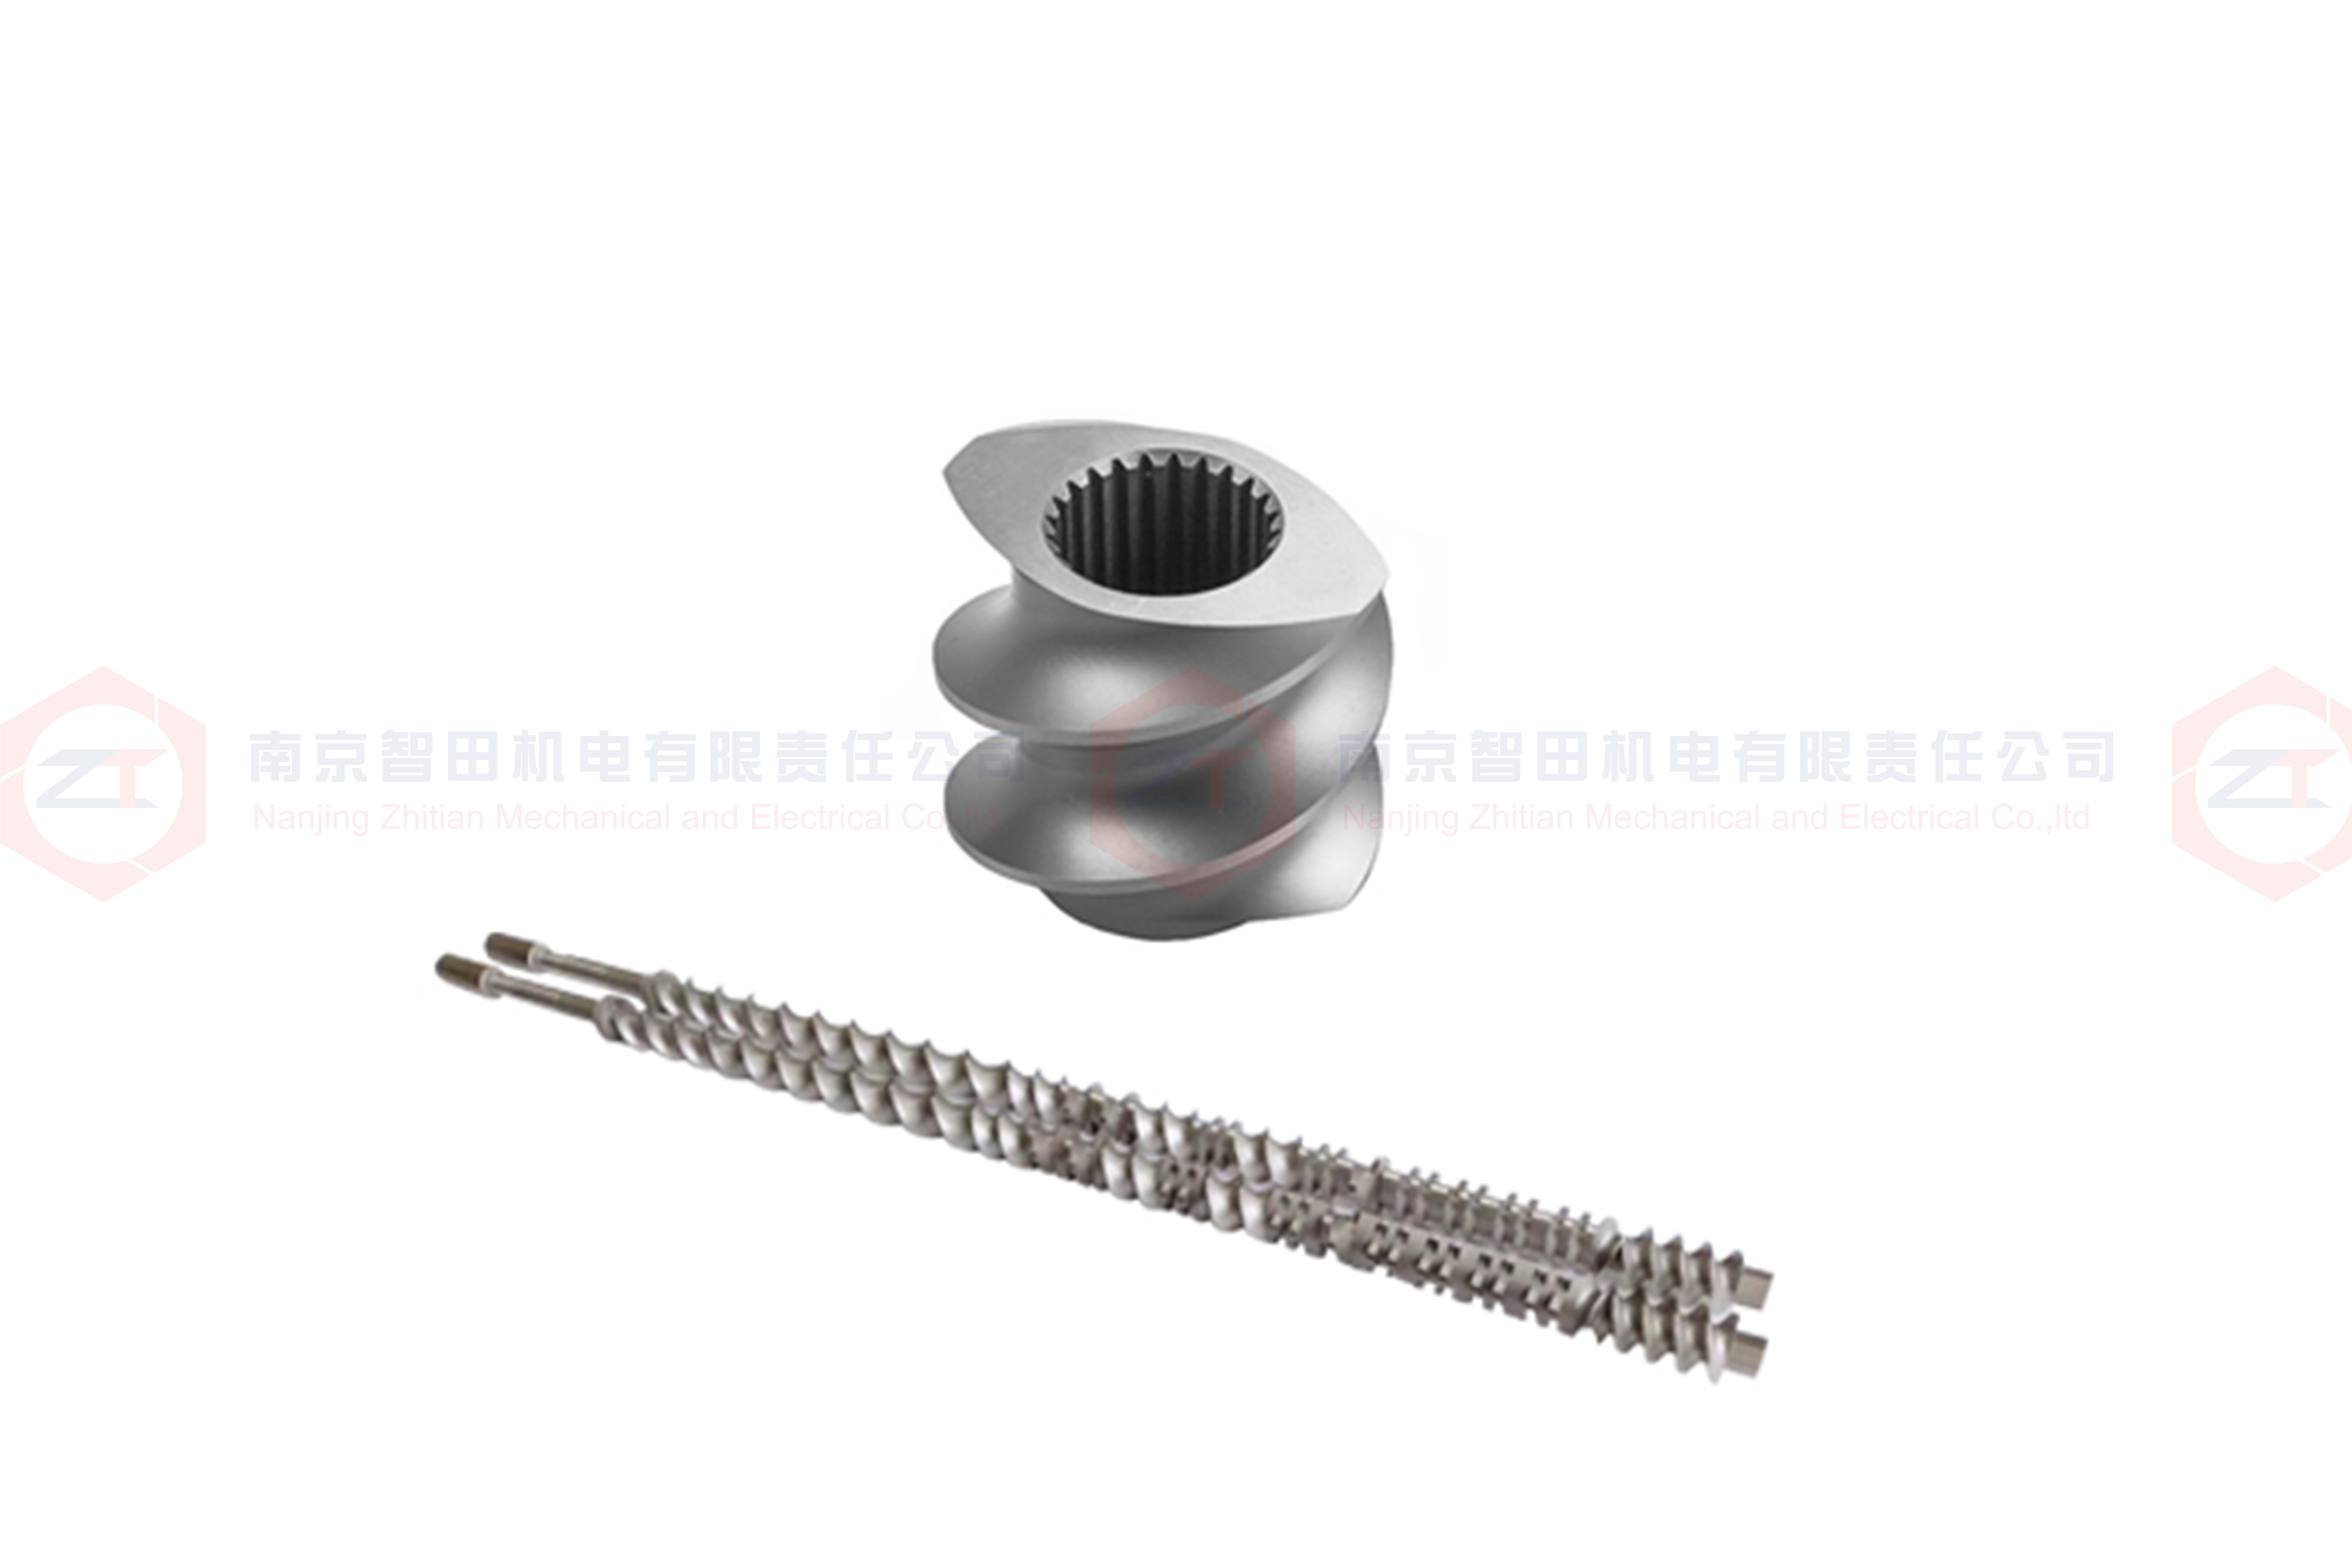 The Benefits of High Precision Extruder Screw Elements in Food Extrusion